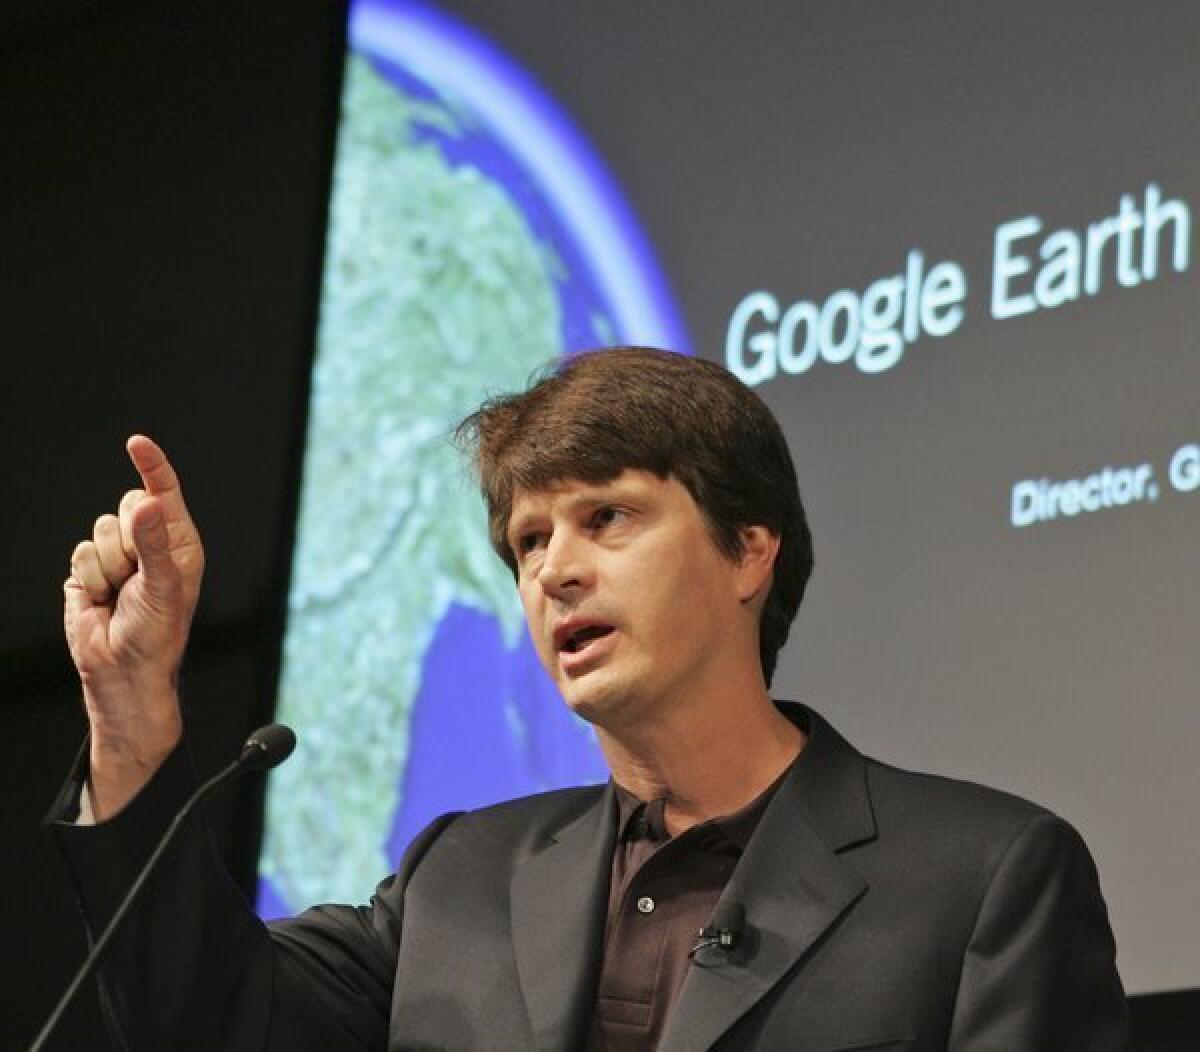 As director of Google's Niantic Labs, Google Earth creator John Hanke masterminded Field Trip, an app that provides real-time, location-based information about shops, buildings and services.